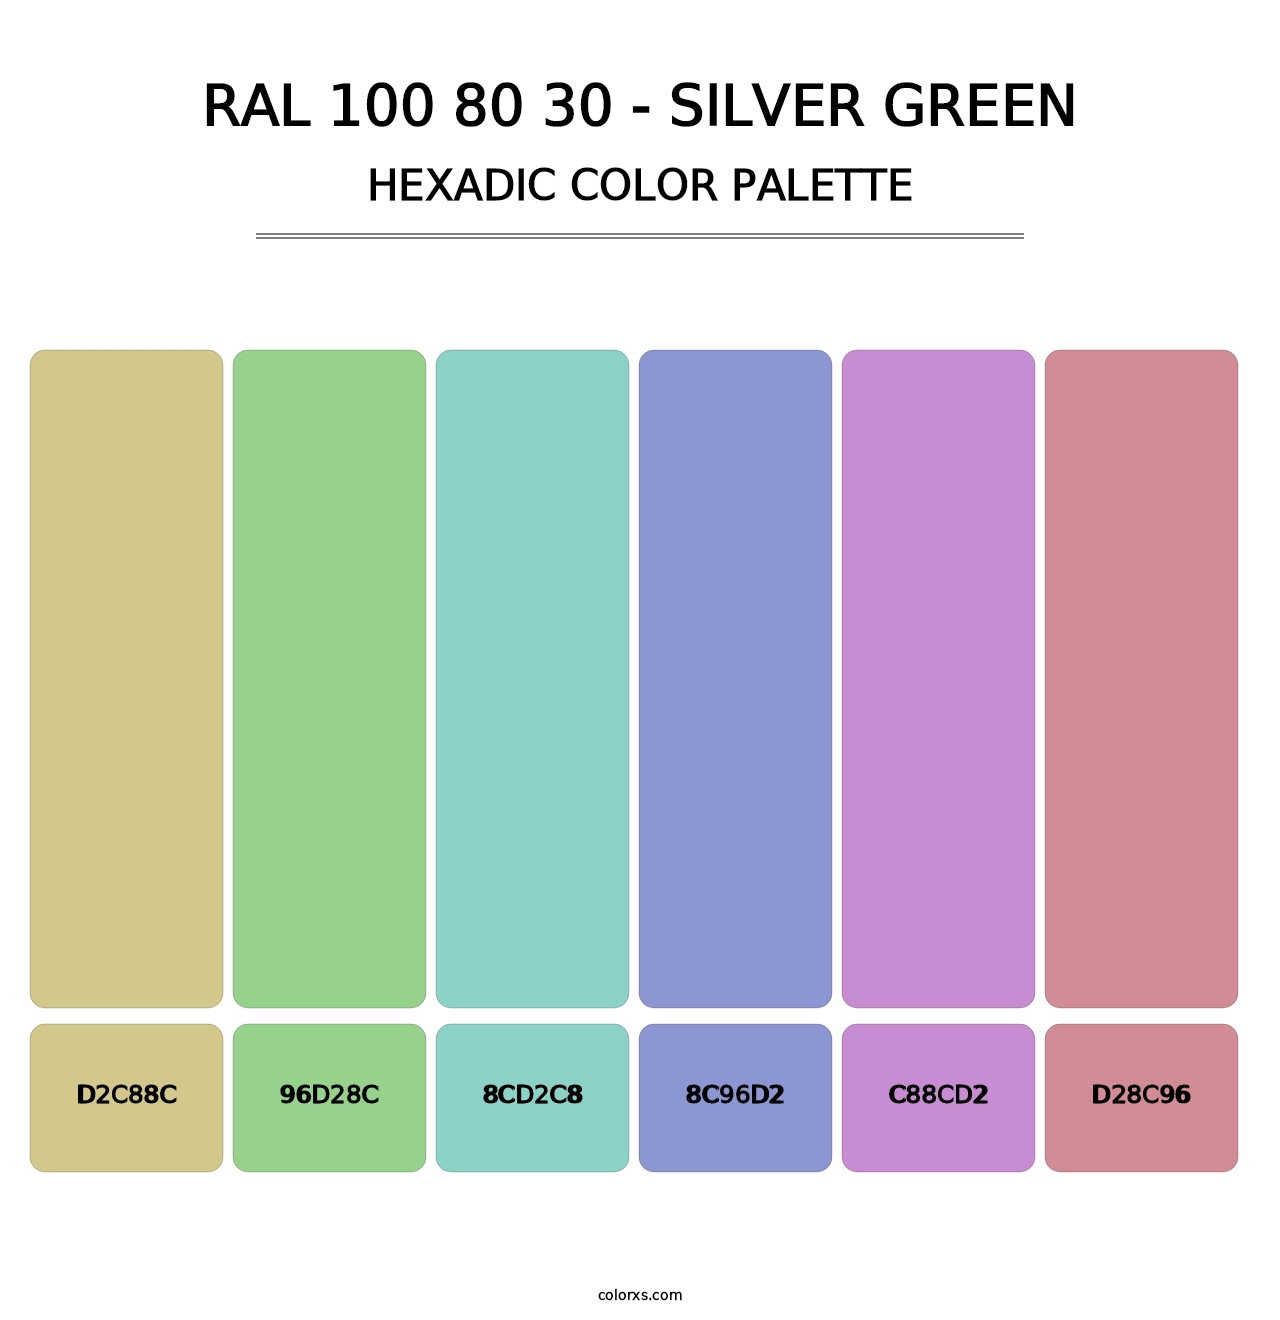 RAL 100 80 30 - Silver Green - Hexadic Color Palette